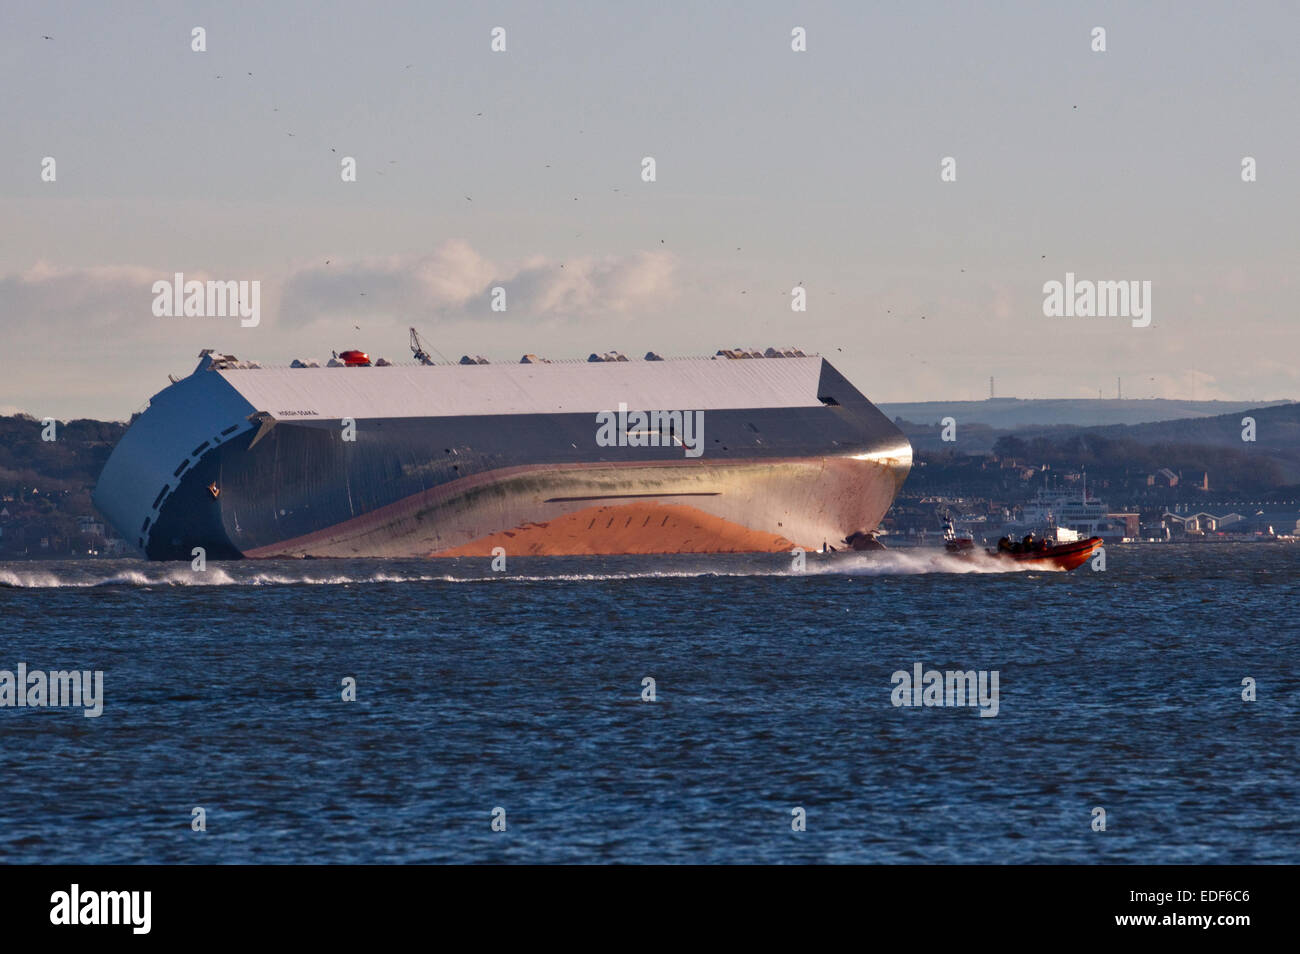 Solent, Hampshire, UK. 6th January, 2015. Hoegh Osaka Car Transporter Ship run aground in the Solent, Hampshire, England - awaiting salvage plans - possible salvage crew crossing in front of ship. 06Jan15 Credit:  Krys Bailey/Alamy Live News Stock Photo